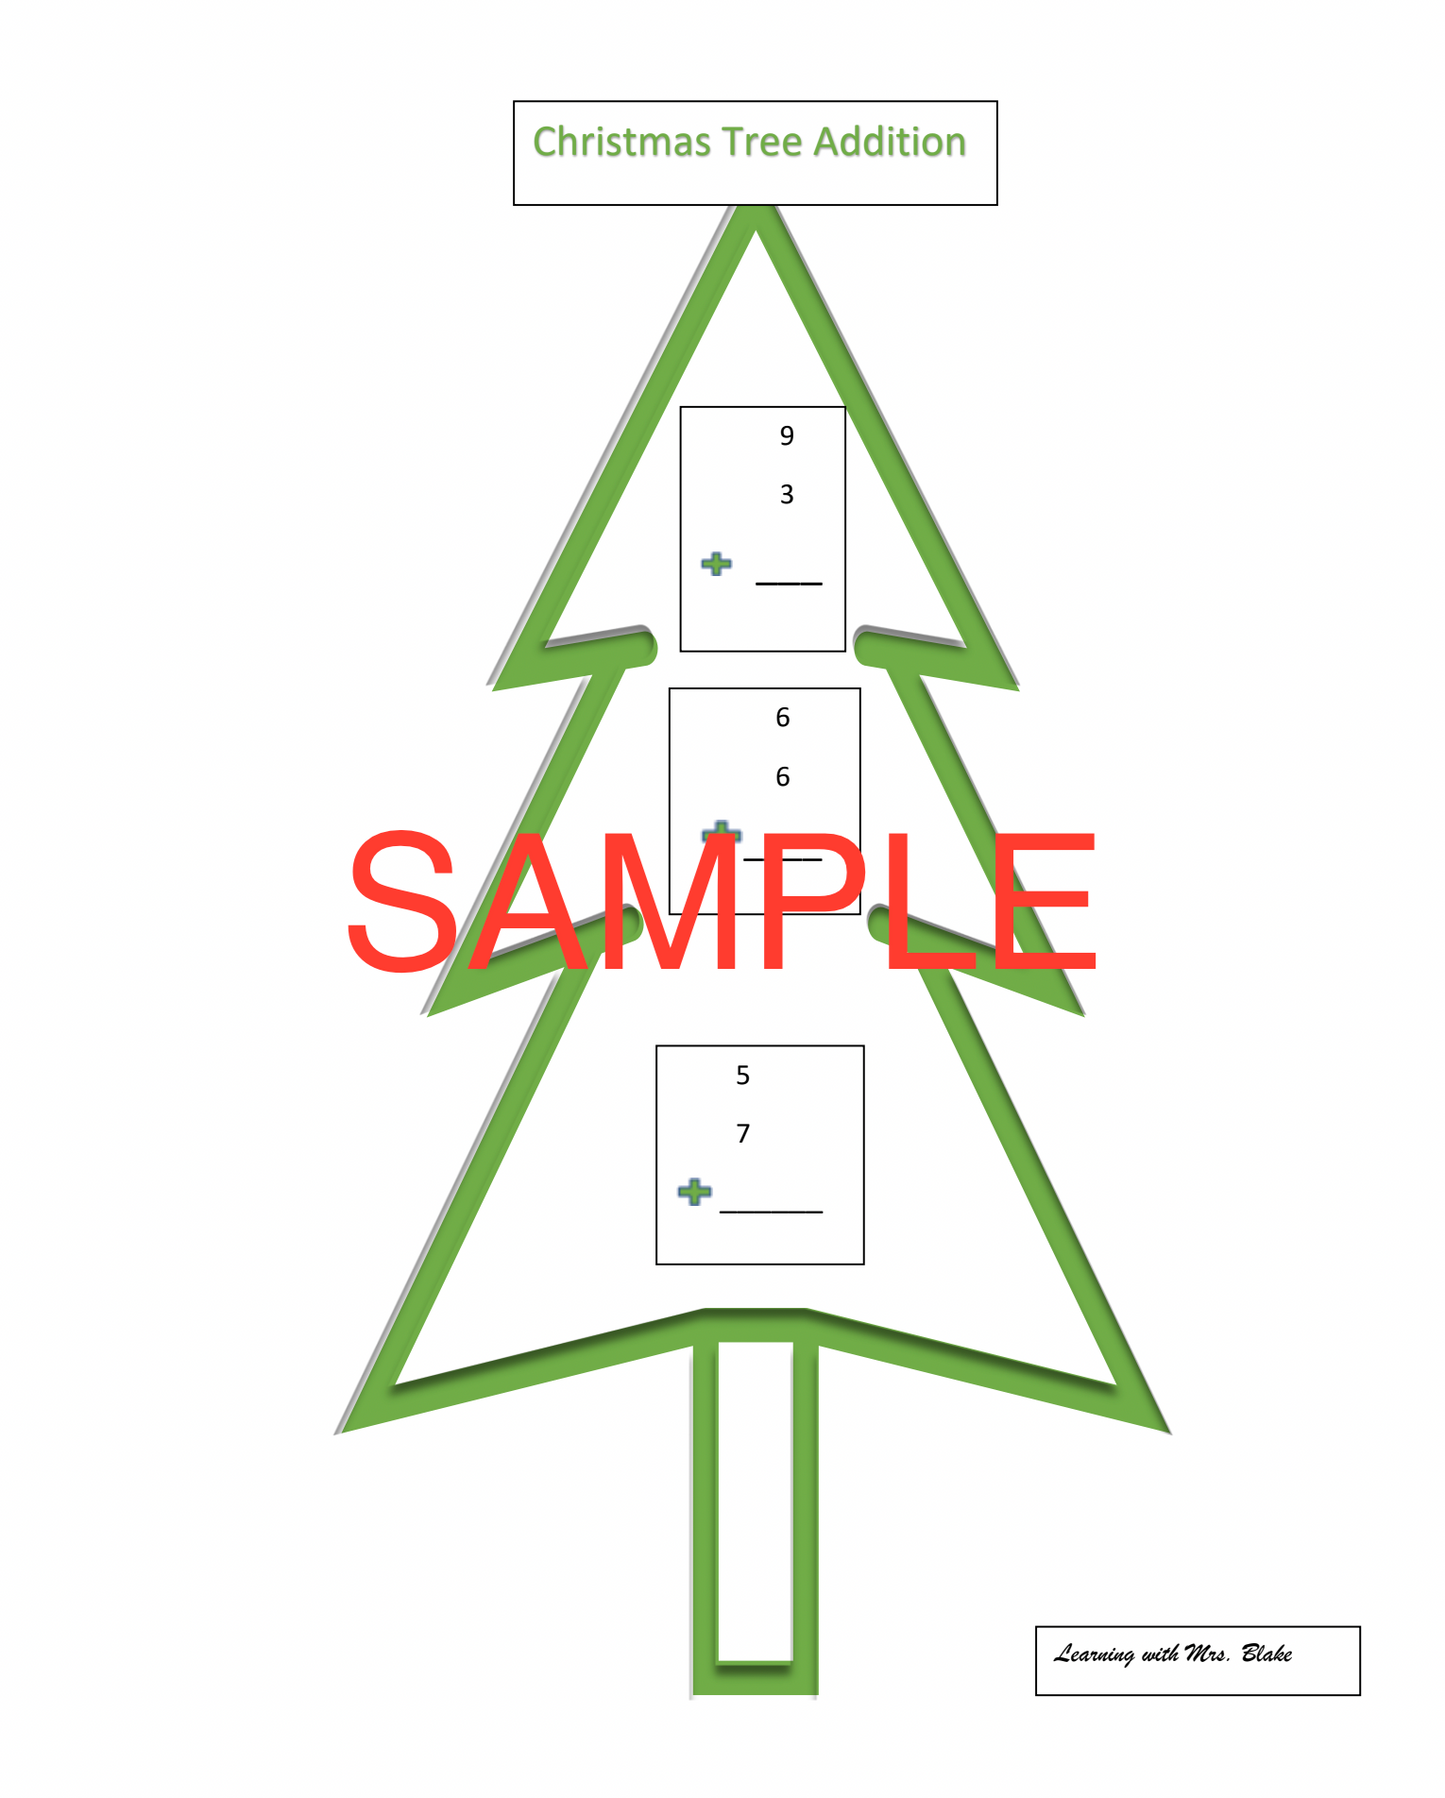 Christmas Tree Addition and Subtraction